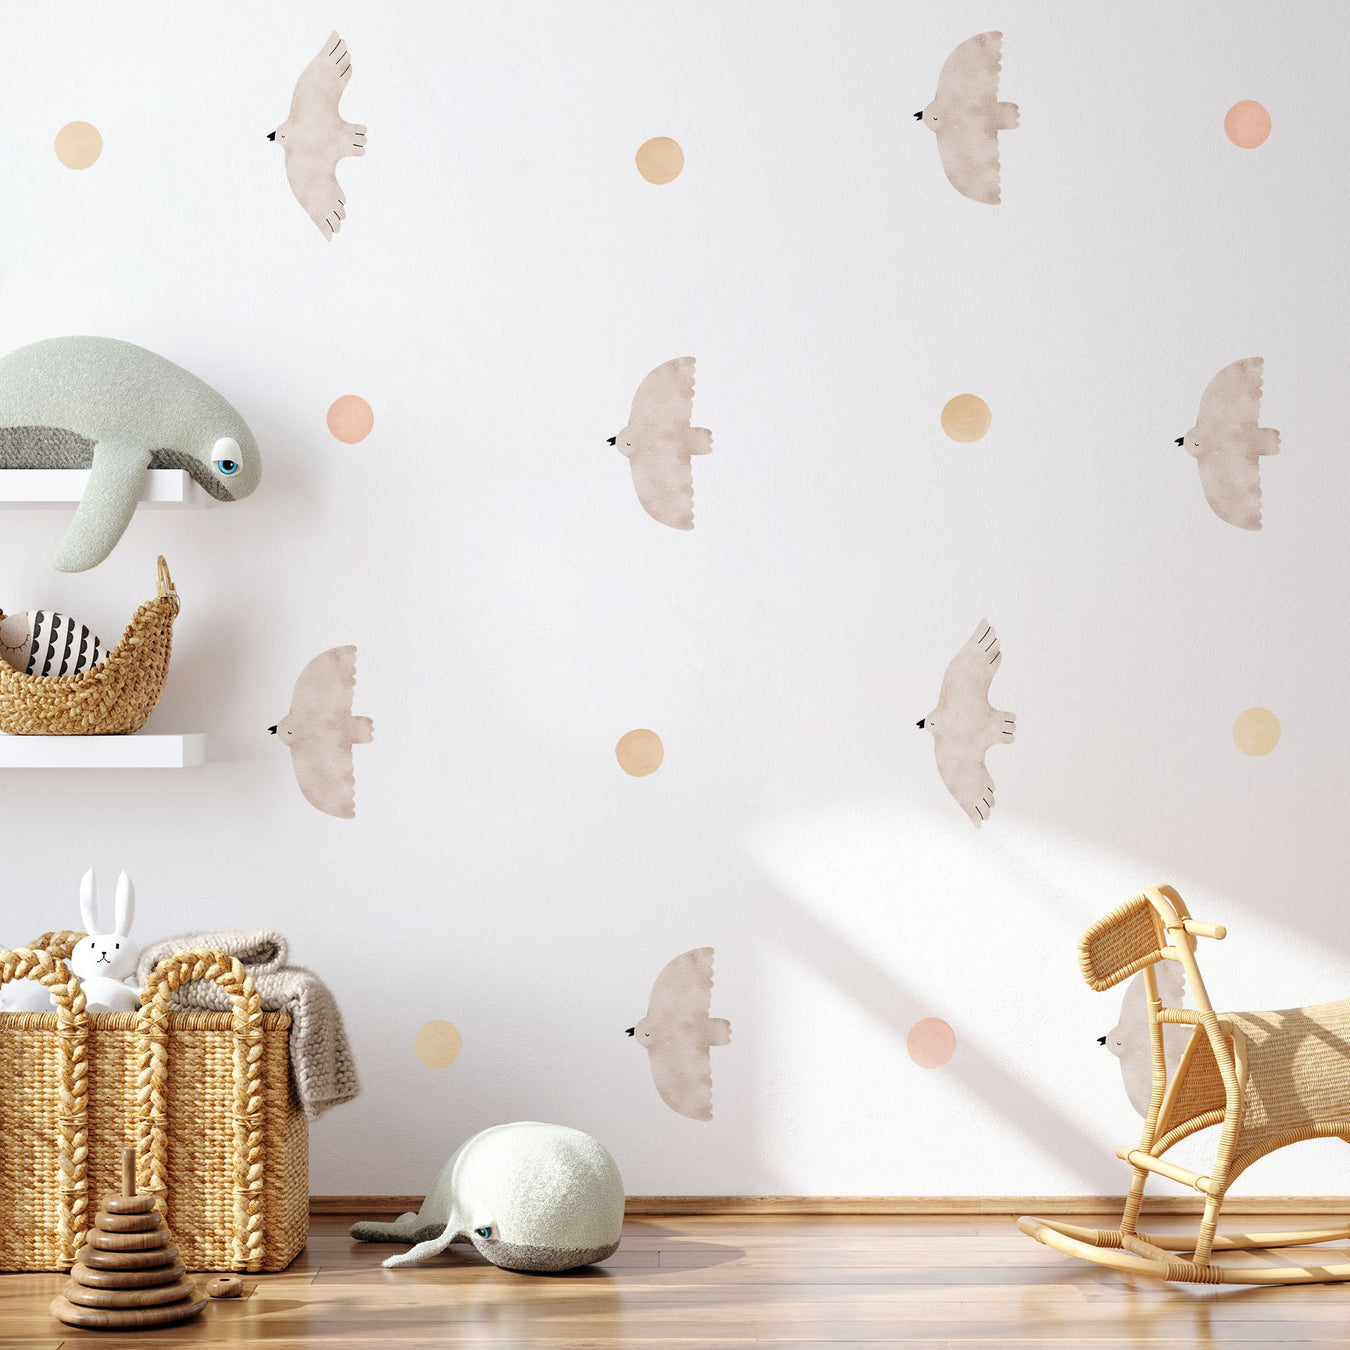 Wall Stickers in Abstract Shapes